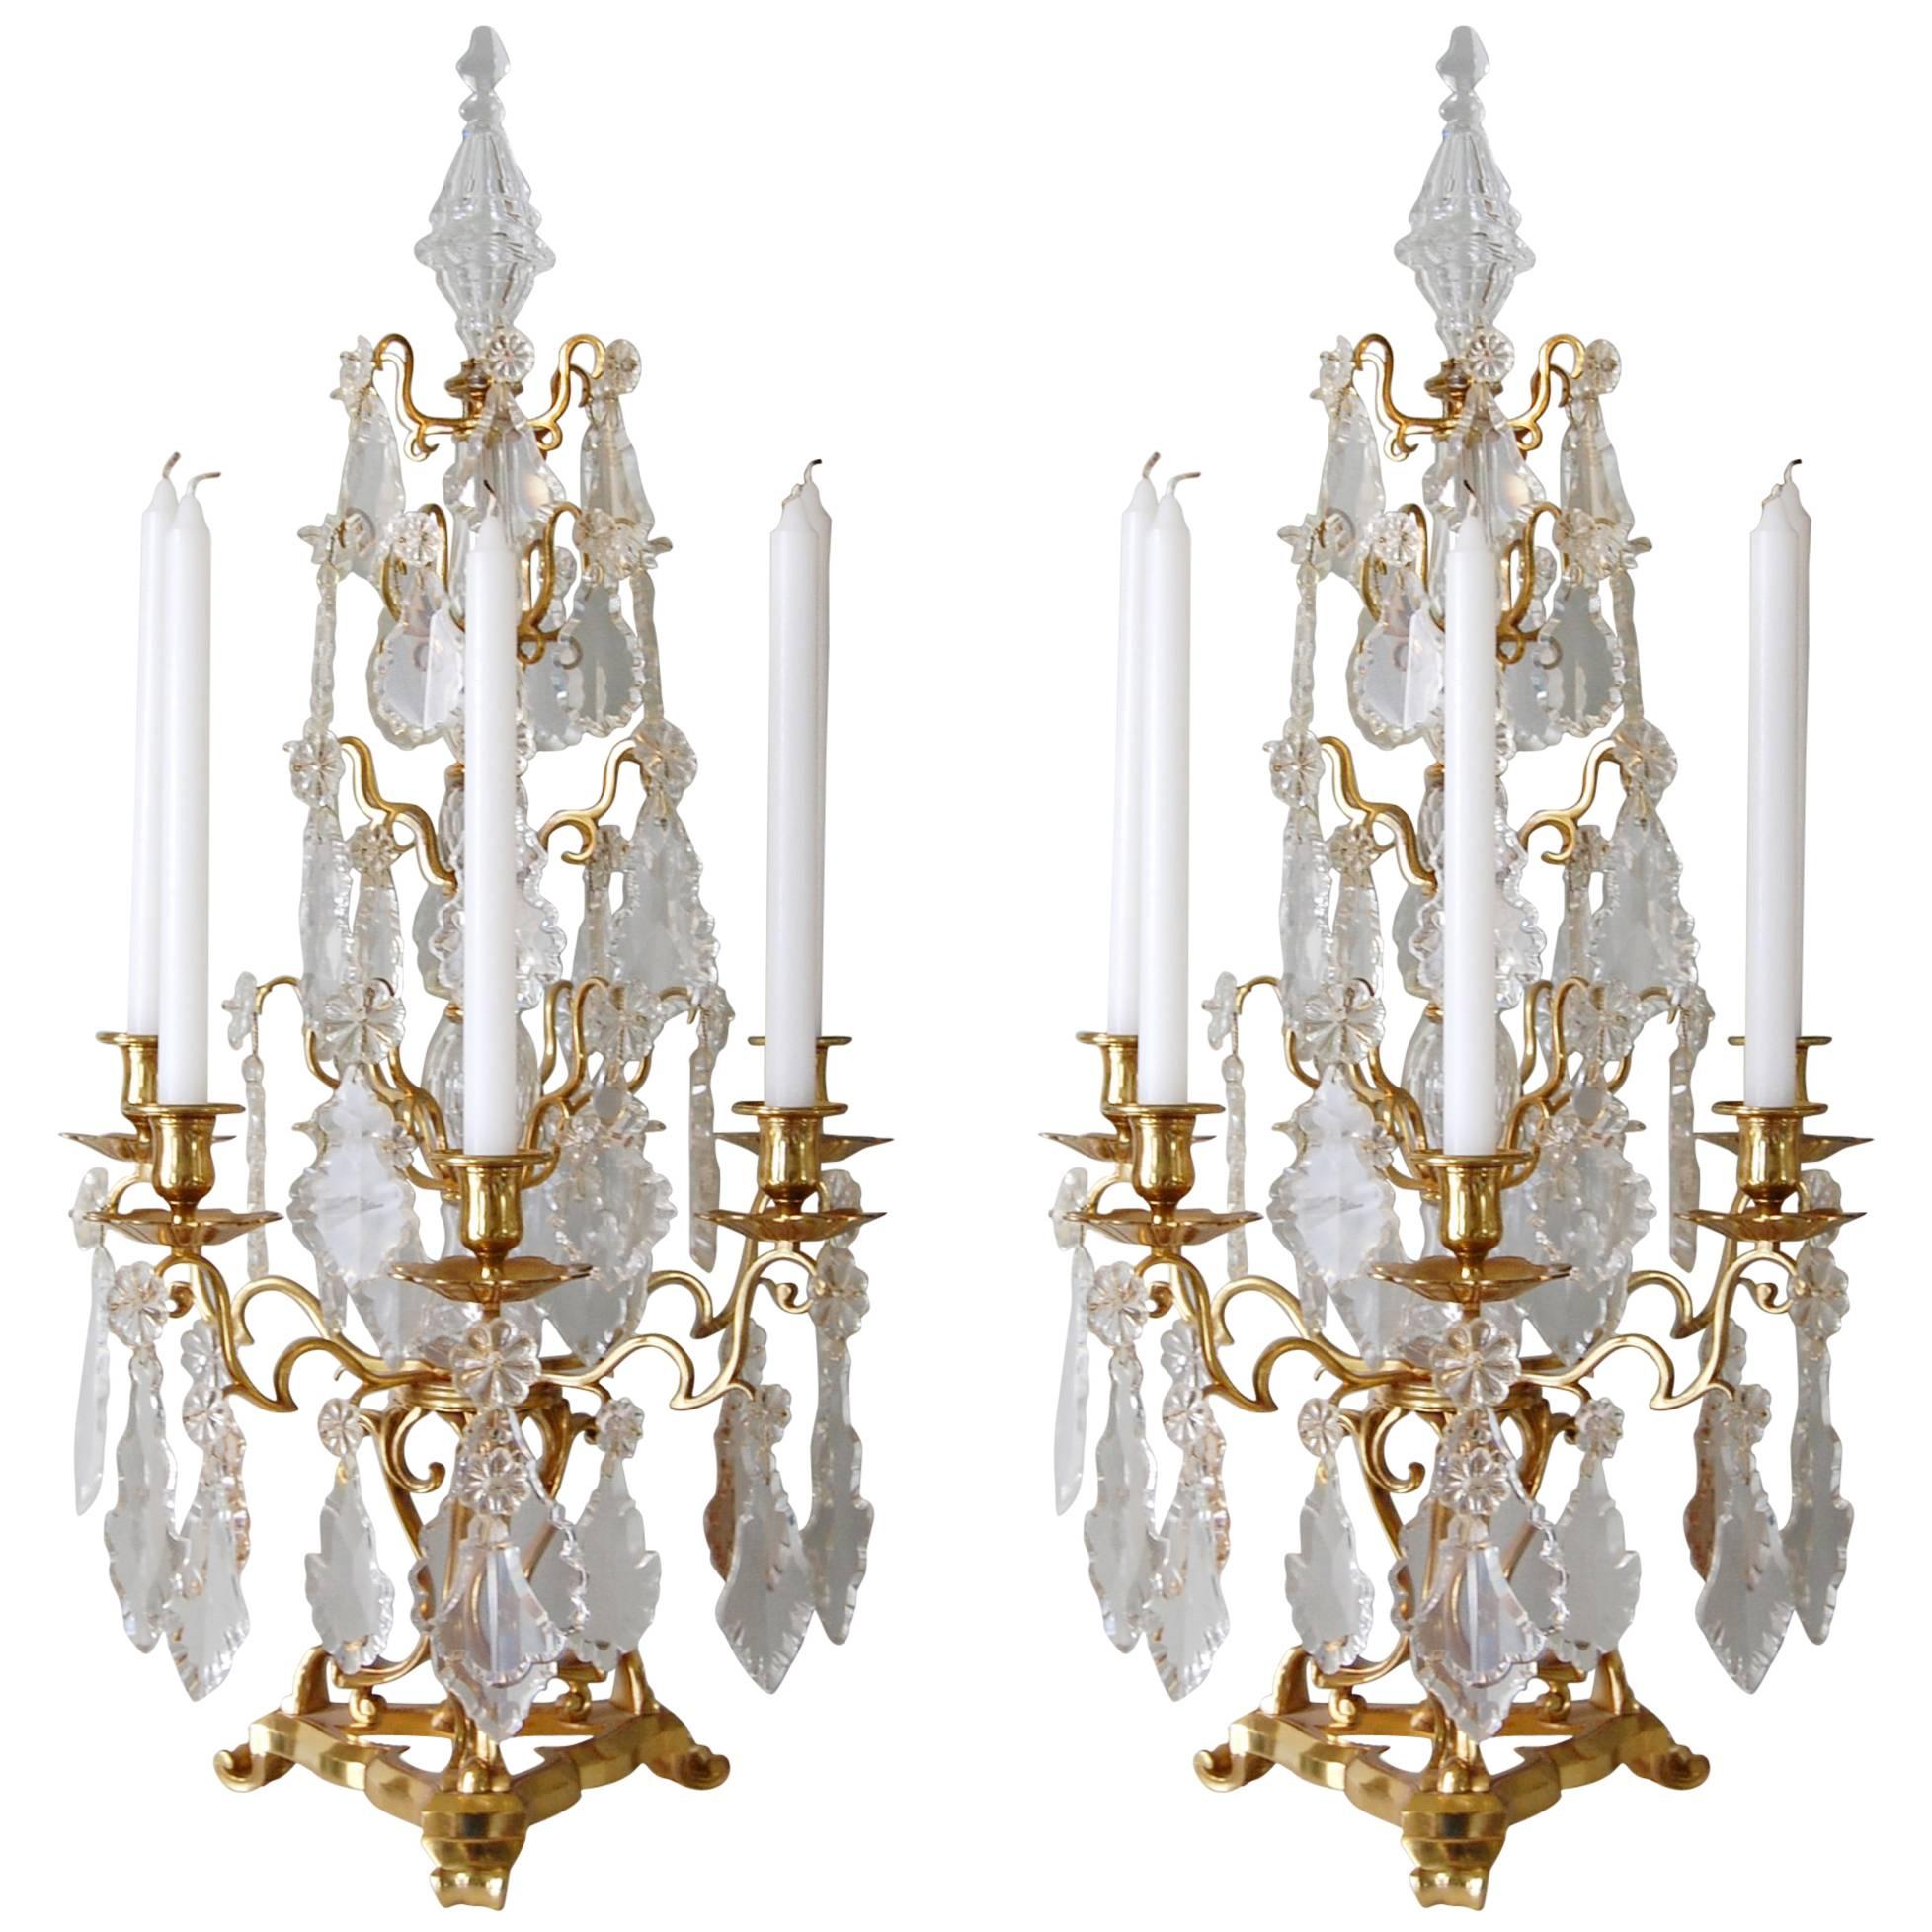 Monumental Pair of Antique French Gilt Bronze and Crystal Girandole Candelabra For Sale